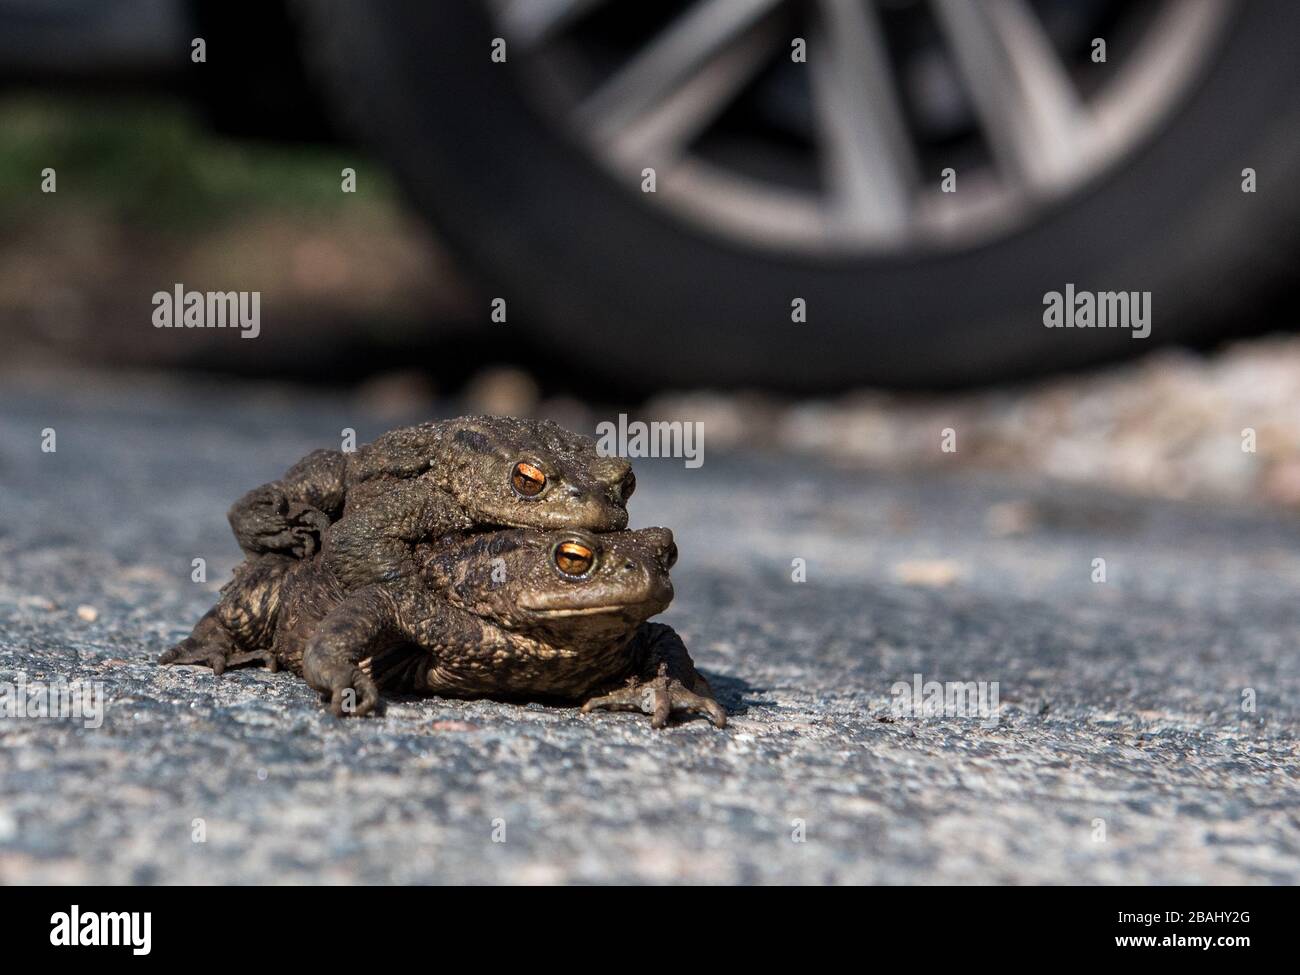 the death of a toad